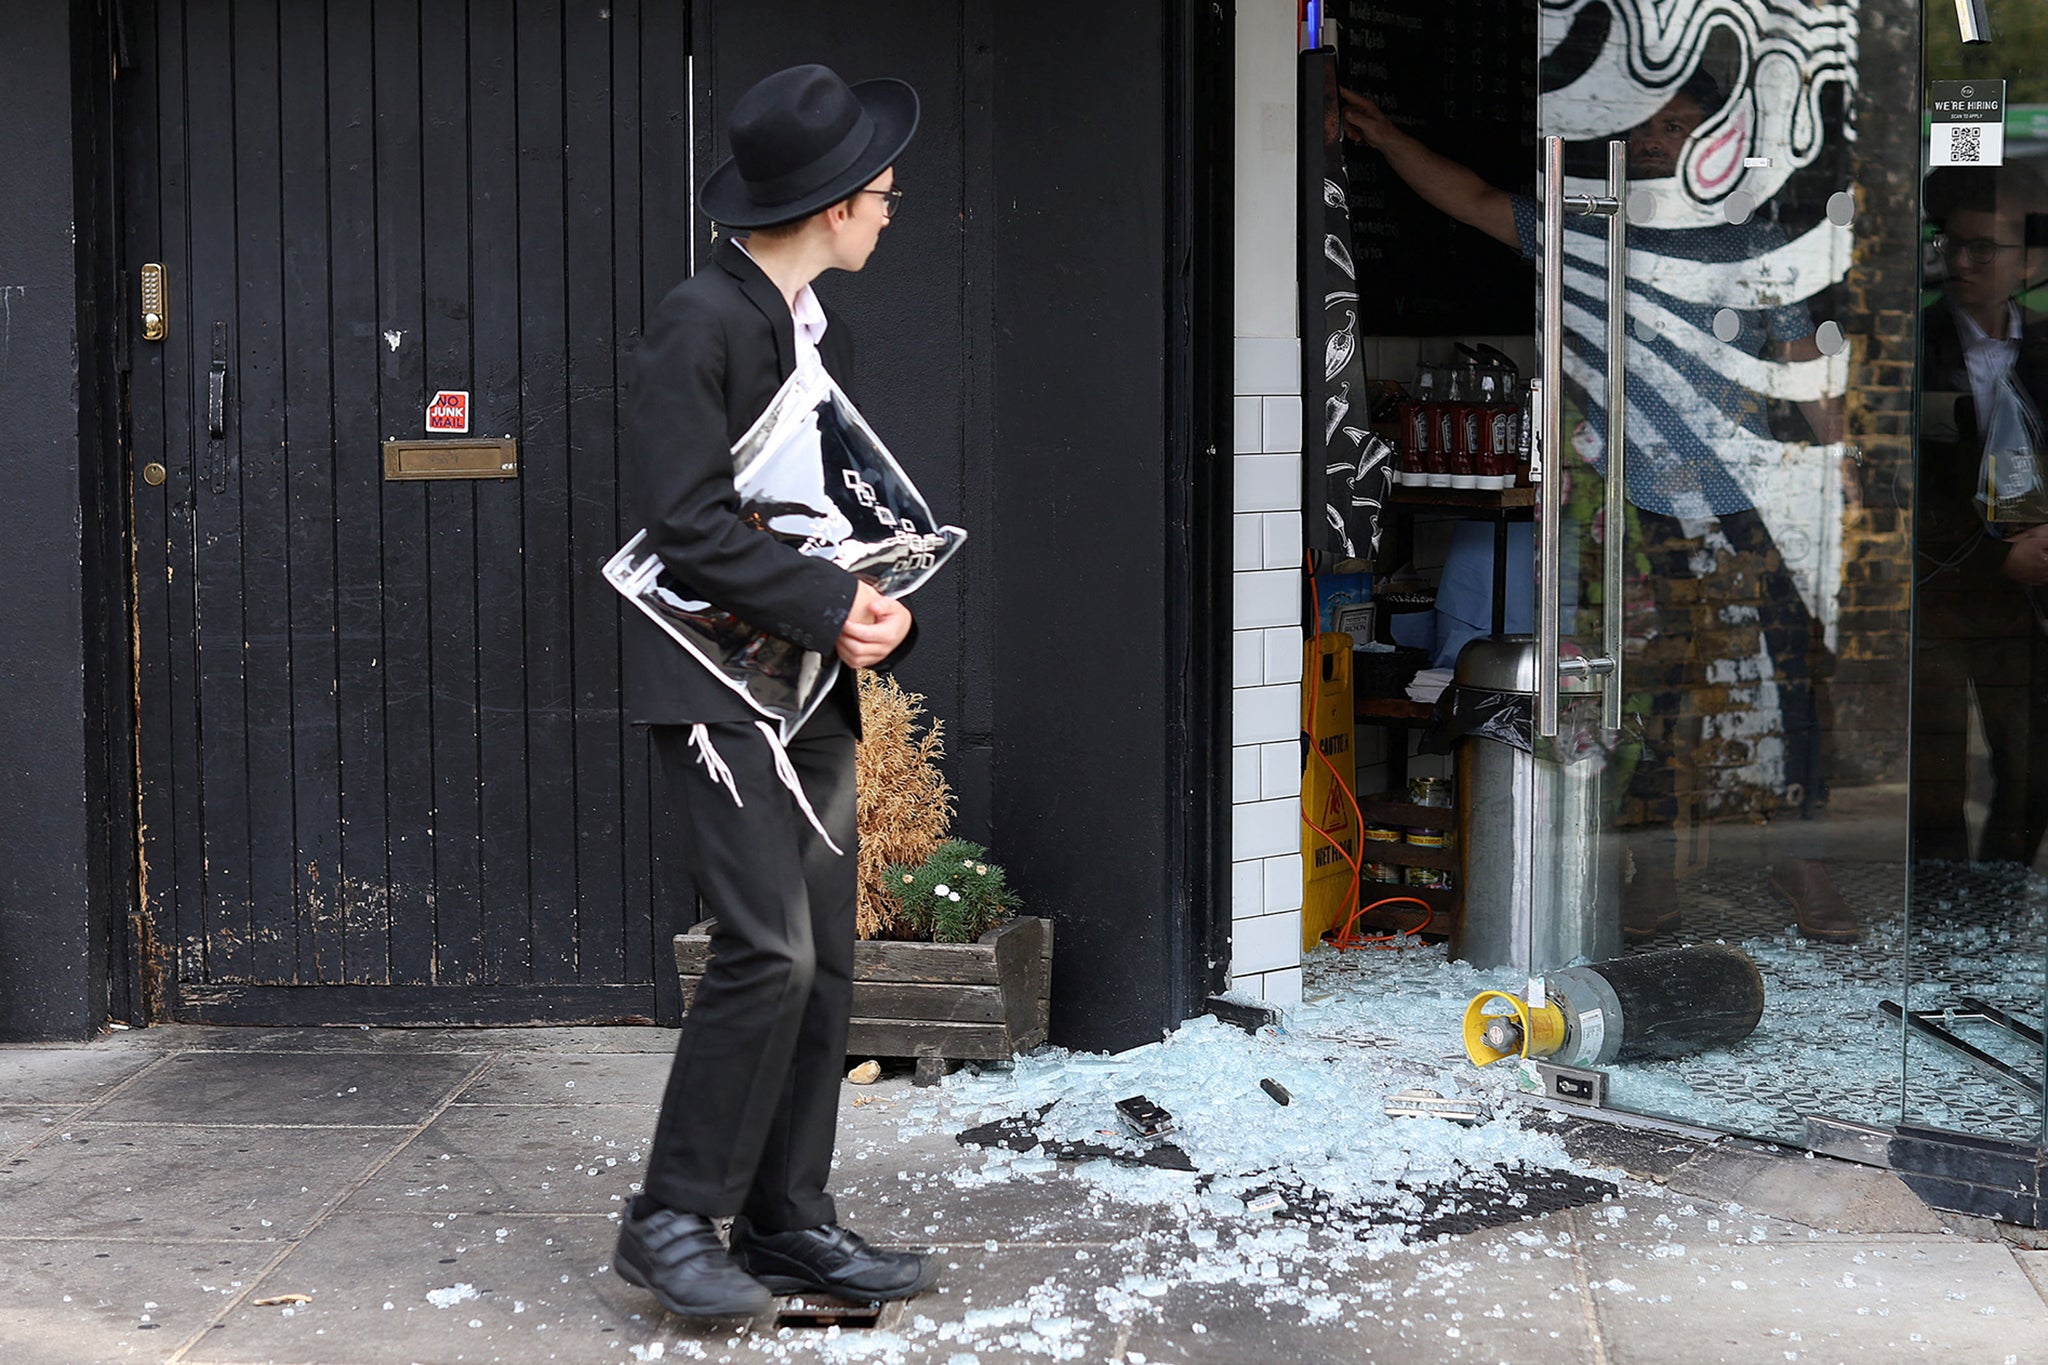 A man looks at a vandalised Kosher restaurant in Golders Green, London, near a bridge with ‘Free Palestine’ painted on it